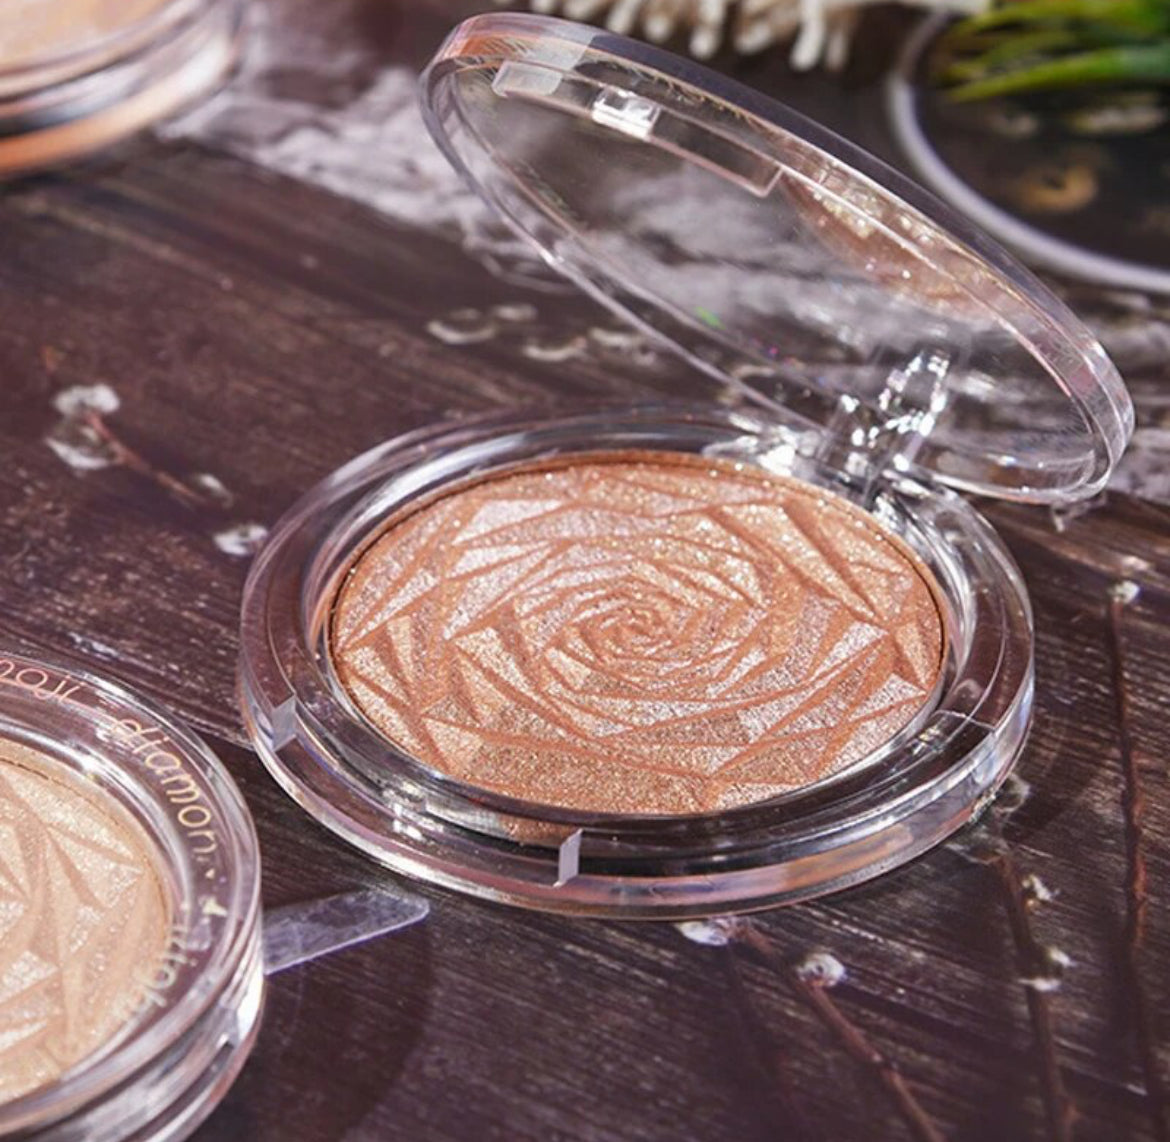 Shimmers, Highlighter, Contour, Illuminating Powder Palette Makeup Glow